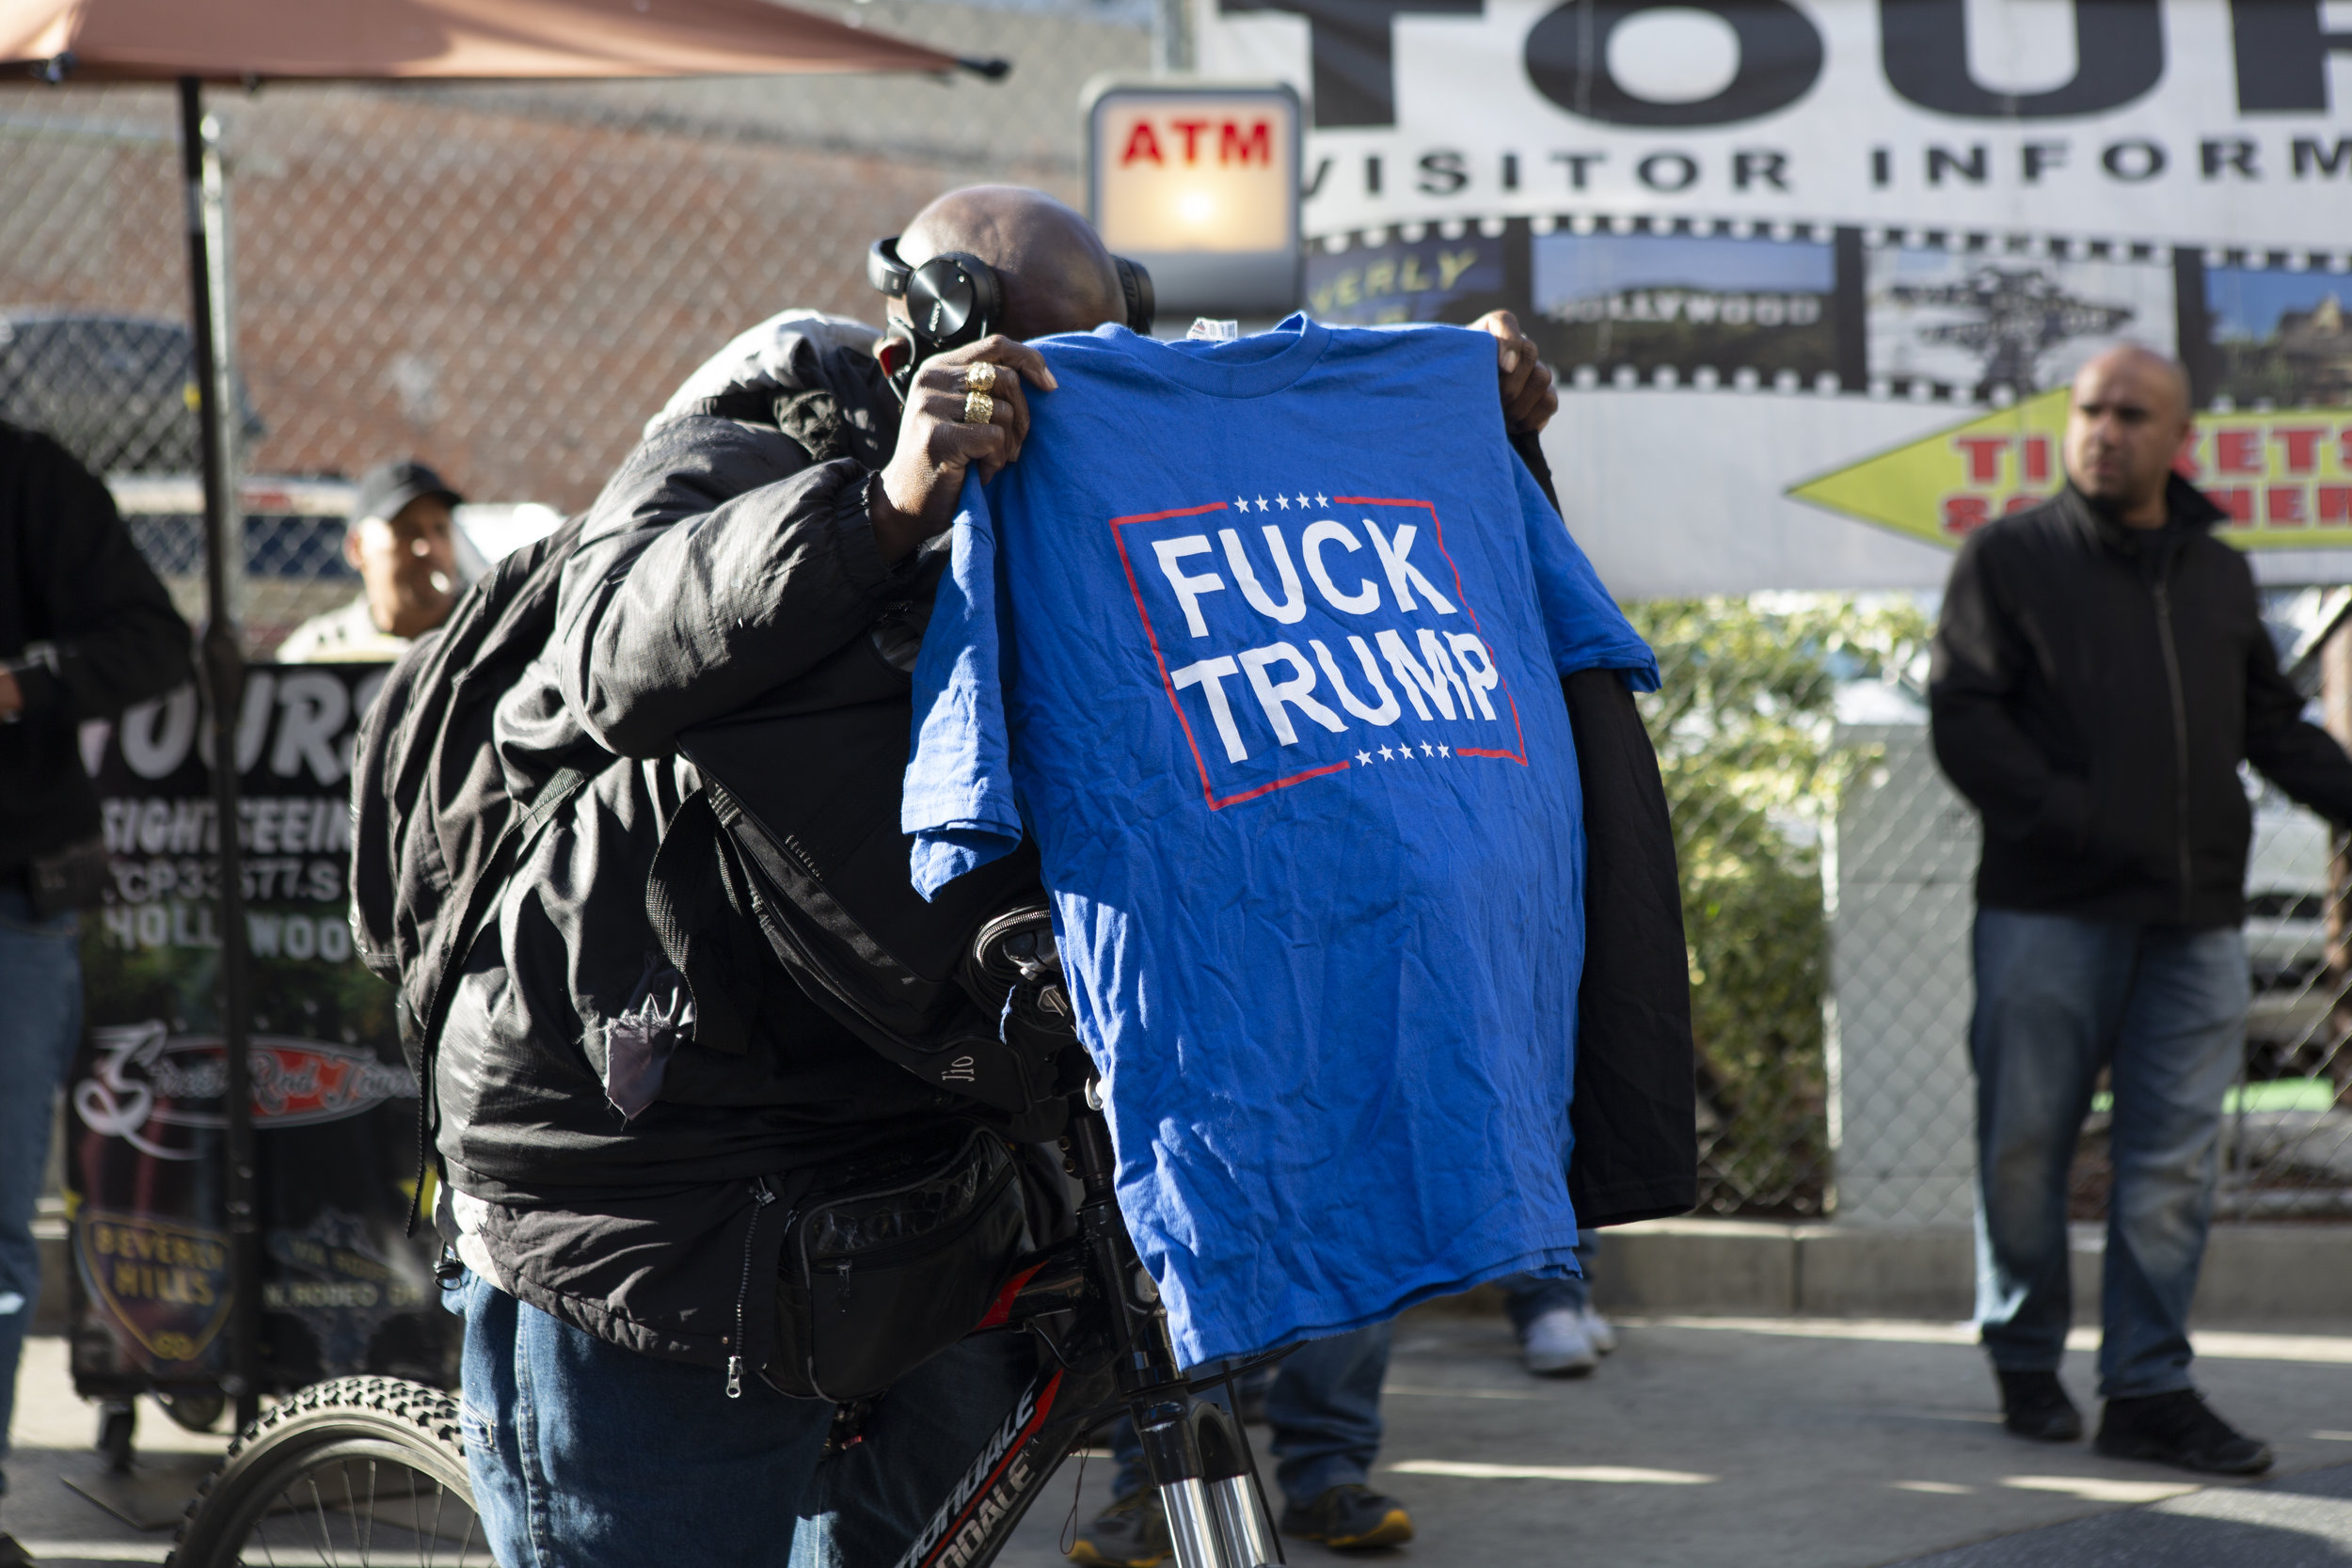  Bernie Sanders supporters gathered for the march and rally, Saturday, February 23, 2019 in Hollywood, Calif. Senator Bernie Sanders announced this past Tuesday that he will again seek the presidency and his supporters get together to support him wit